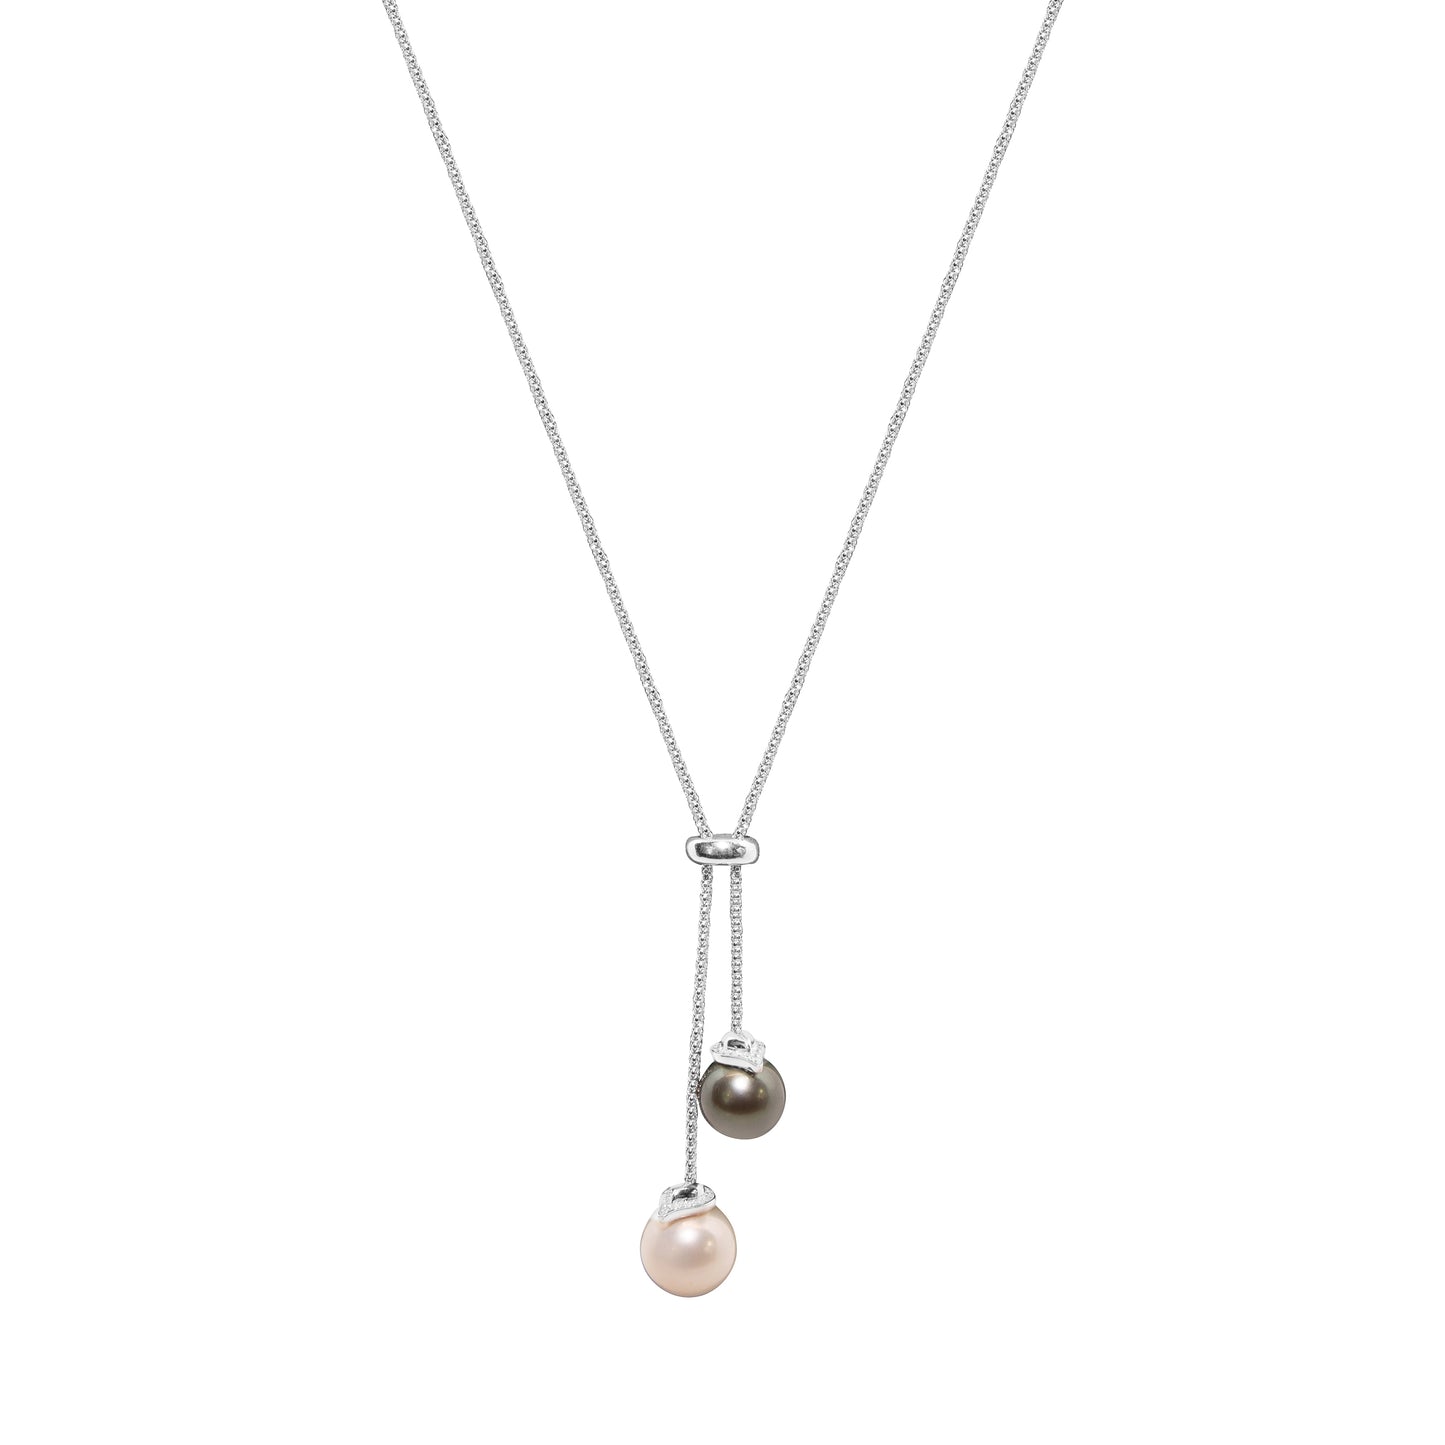 Adjustable Silver & Tahitian Pearl Duette Necklace